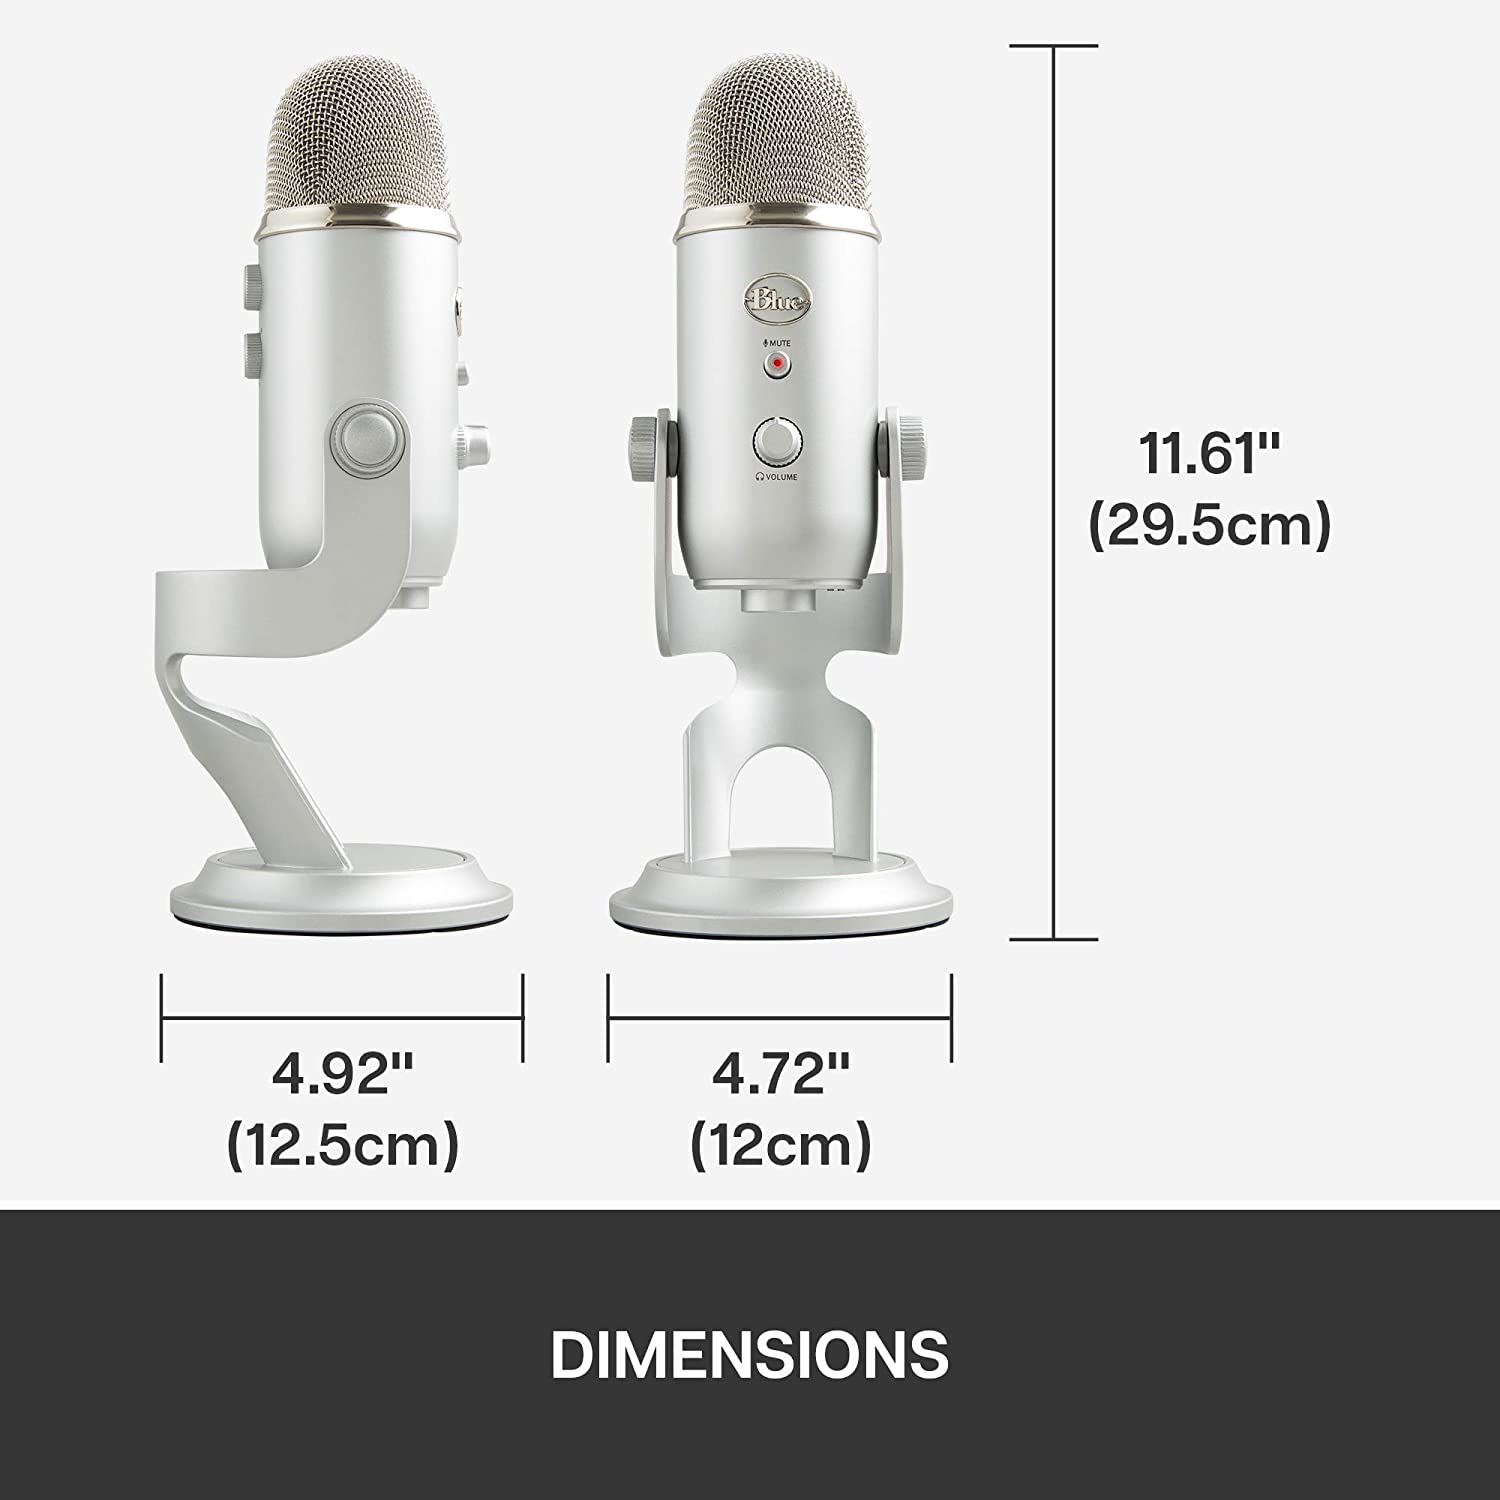 Blue Yeti USB Mic for Recording and Streaming Videos Online